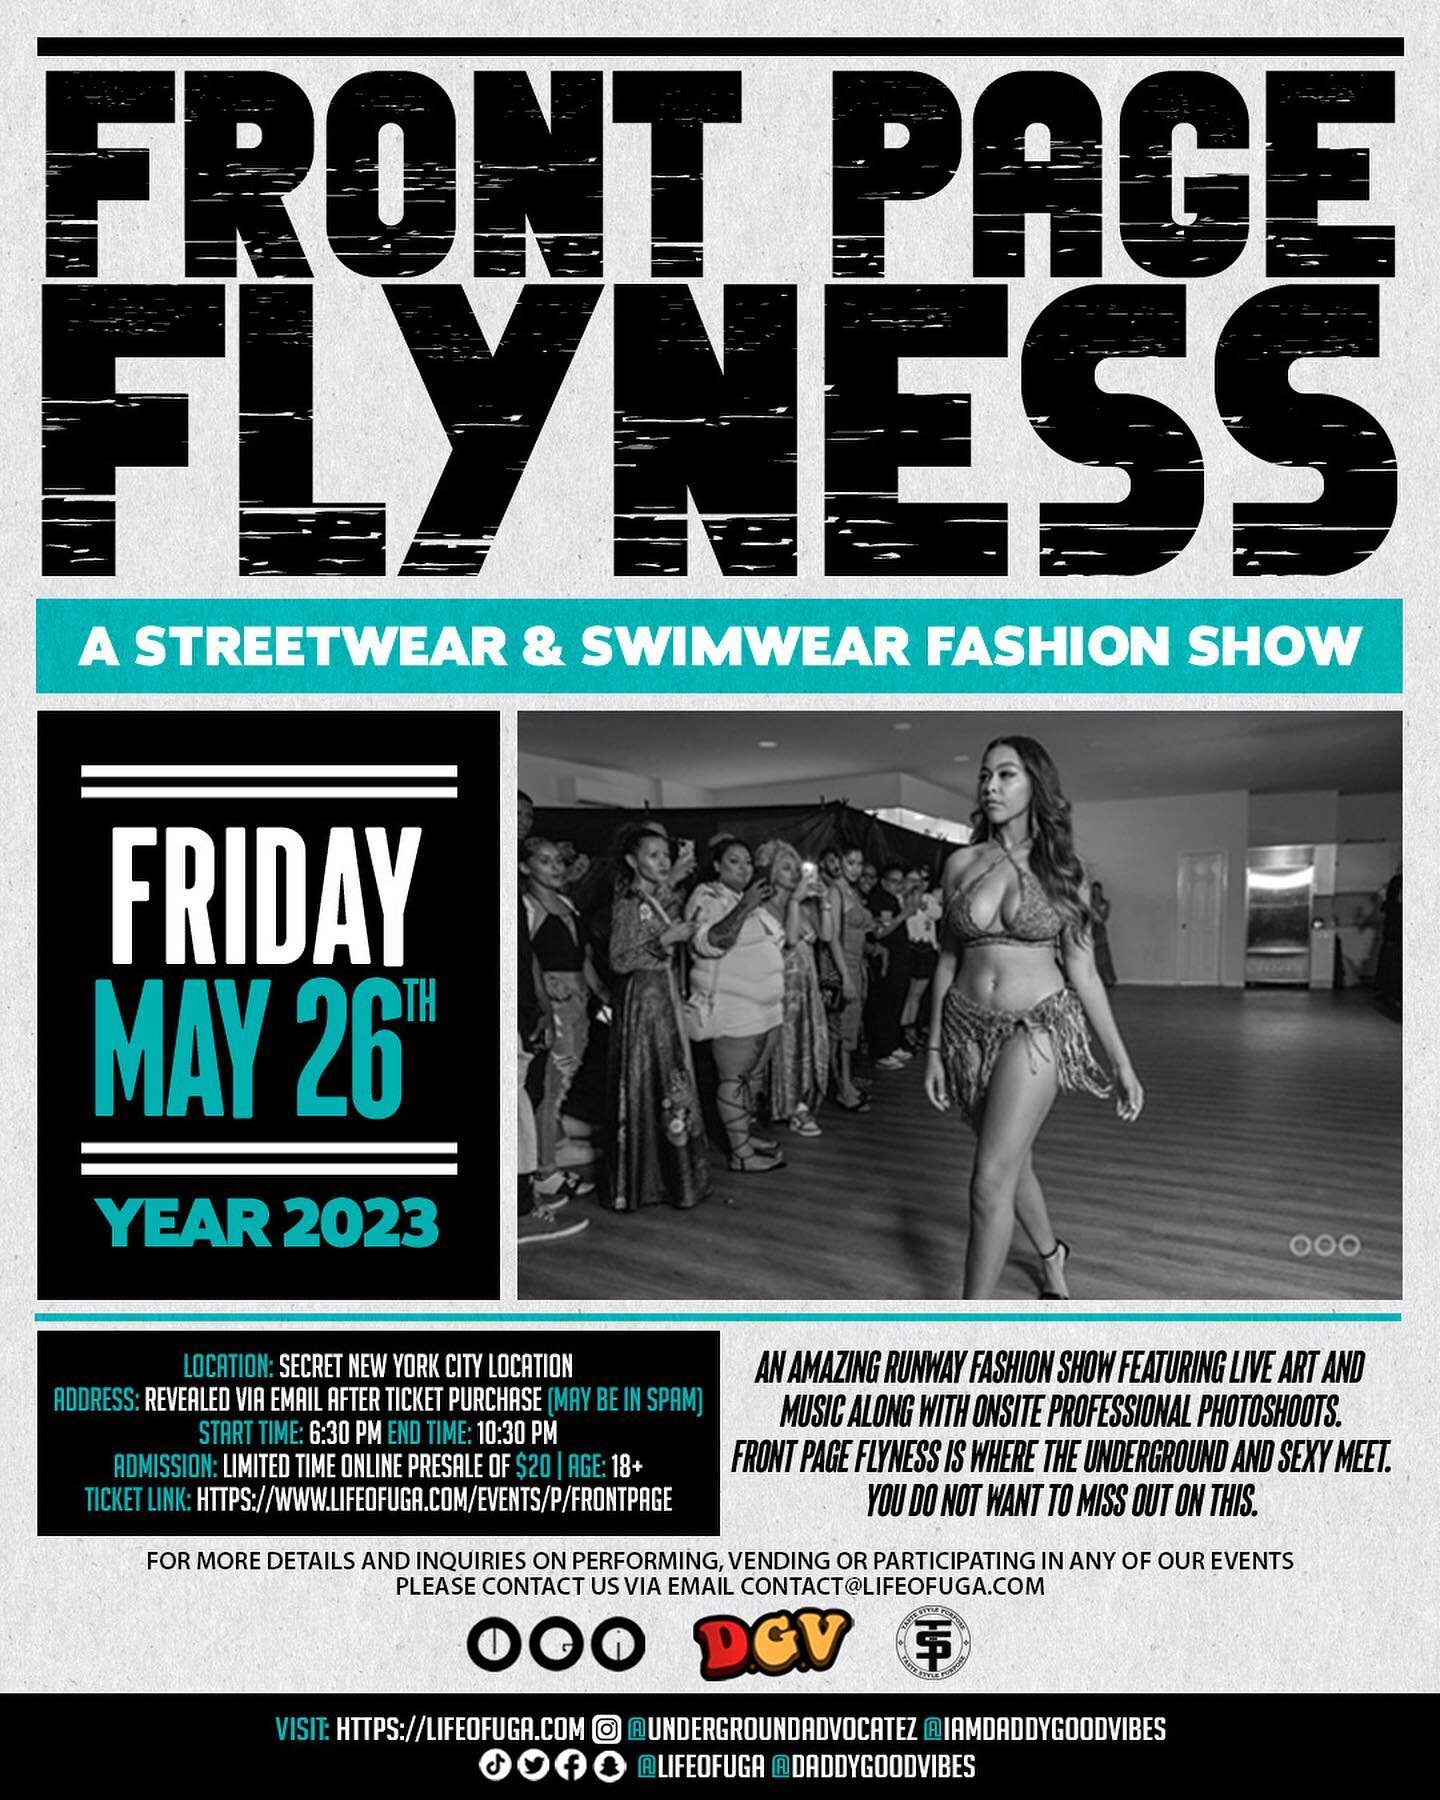 This memorial weekend join us for a fun runway fashion show live photoshoot content mixer event highlighting spring and summer lines of streetwear and swimwear brands. 

With an overall vibe dedicated to creativity and live entertainment with network